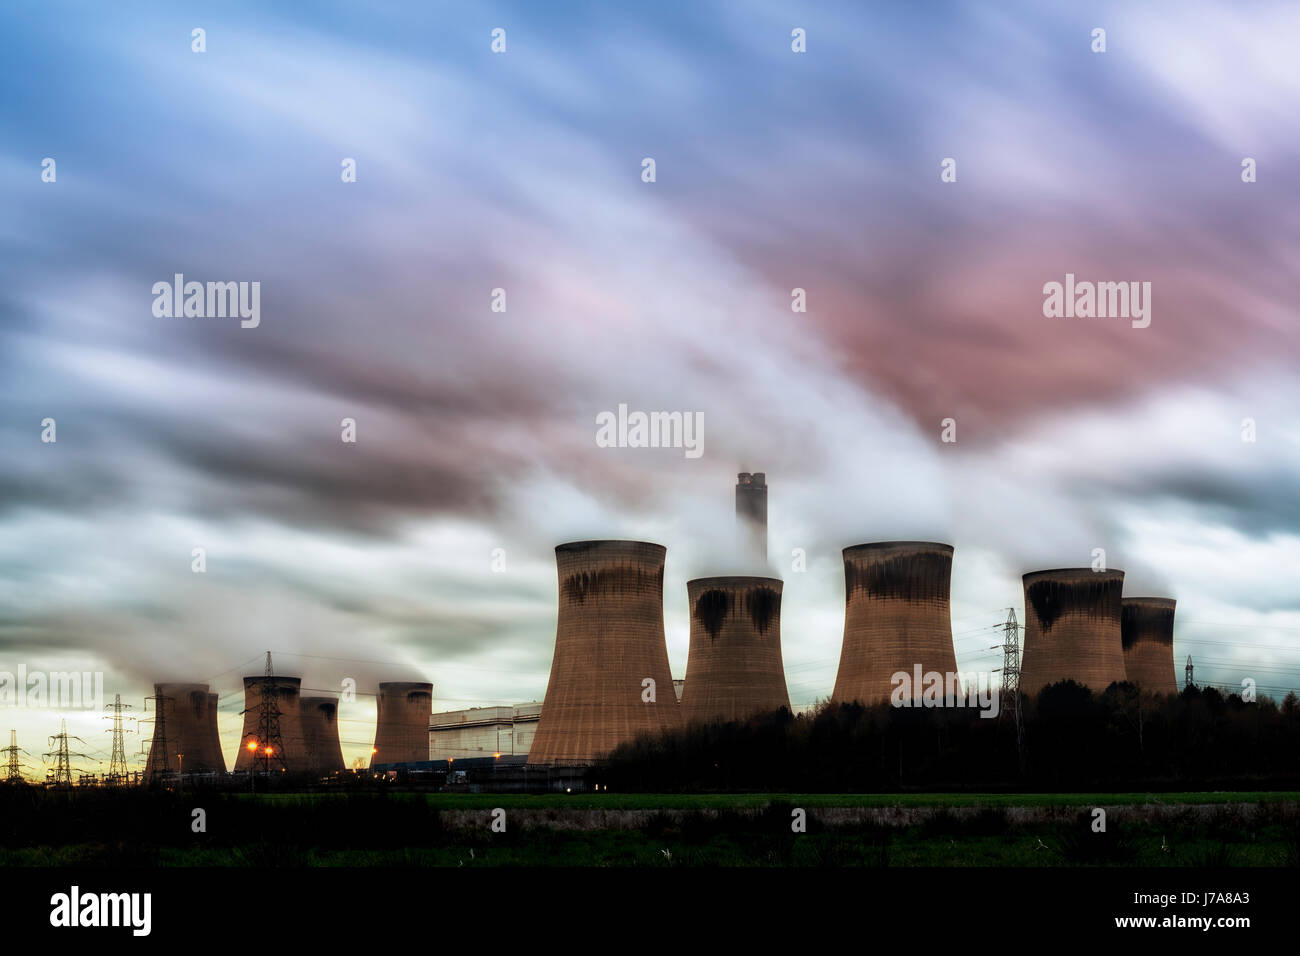 Drax is a large coal-fired power station in North Yorkshire, England, capable of co-firing biomass and petcoke, and its name comes from the nearby vil Stock Photo